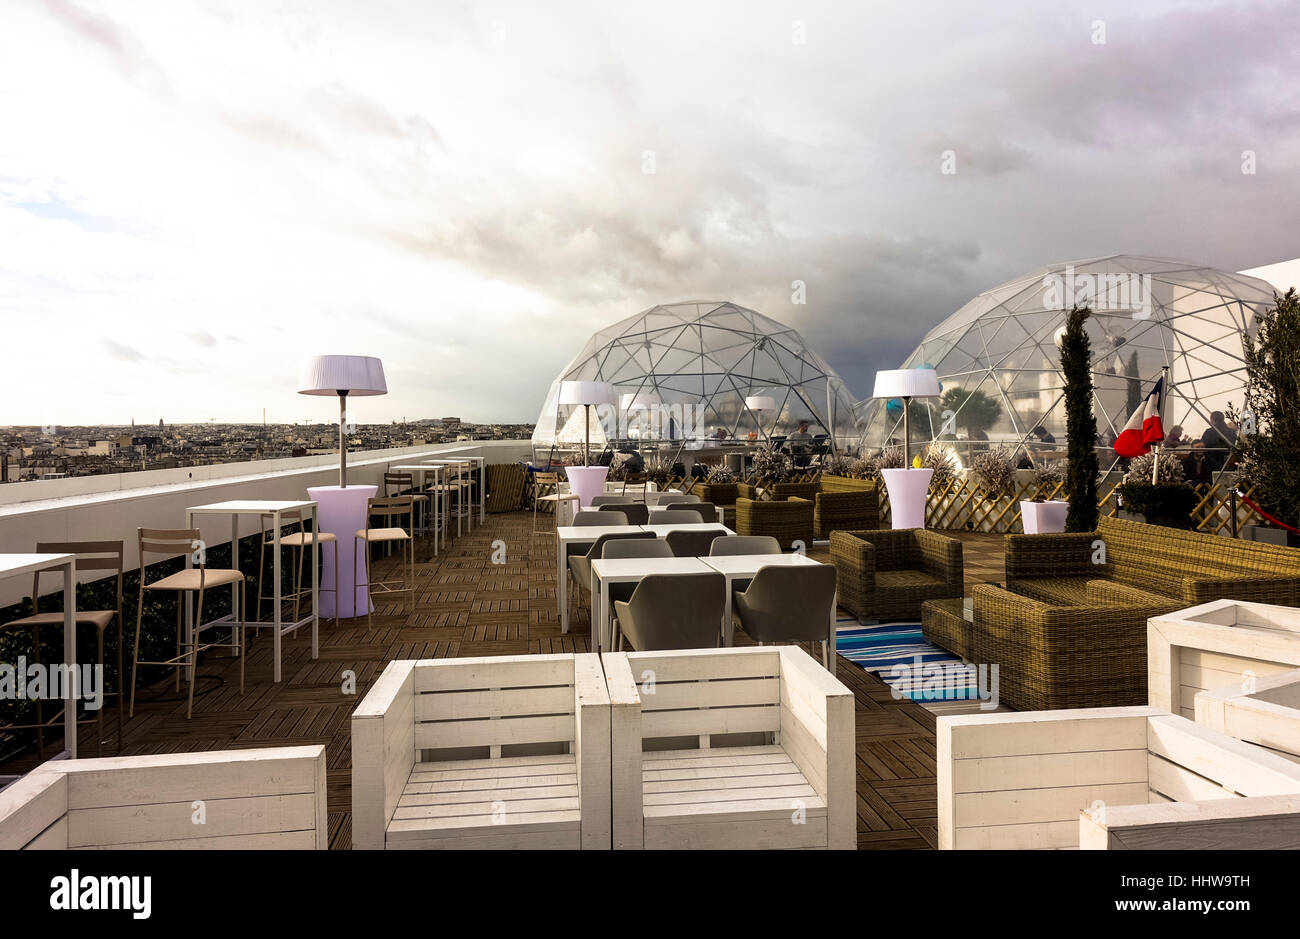 Galeries Lafayette - It's time for a rooftop dinner at Galeries